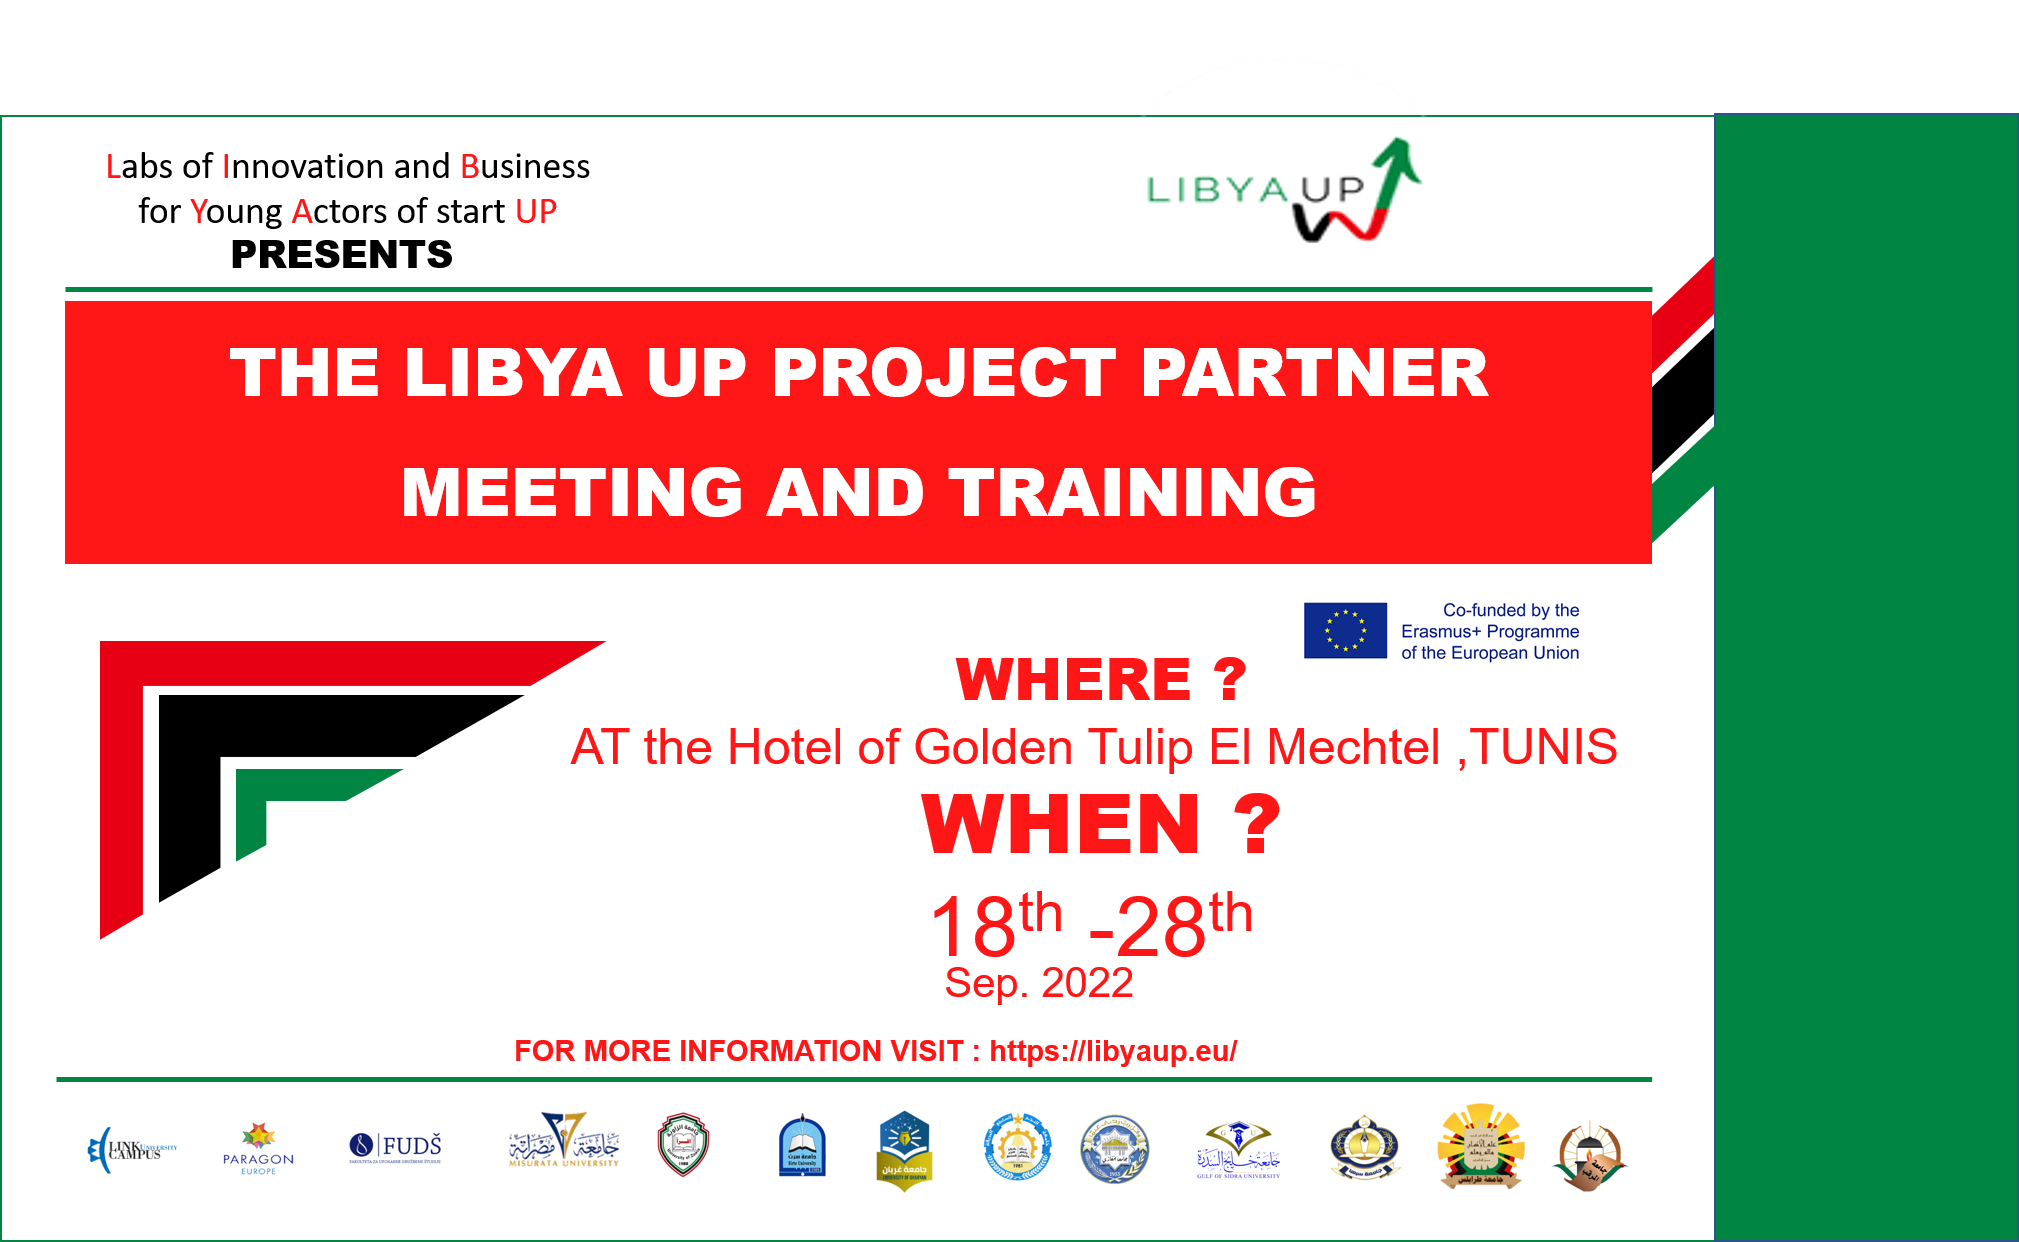  (Training Sessions WP4  and WP5) Labs of Innovation and Business for Young Actors of start Up - Libya UP